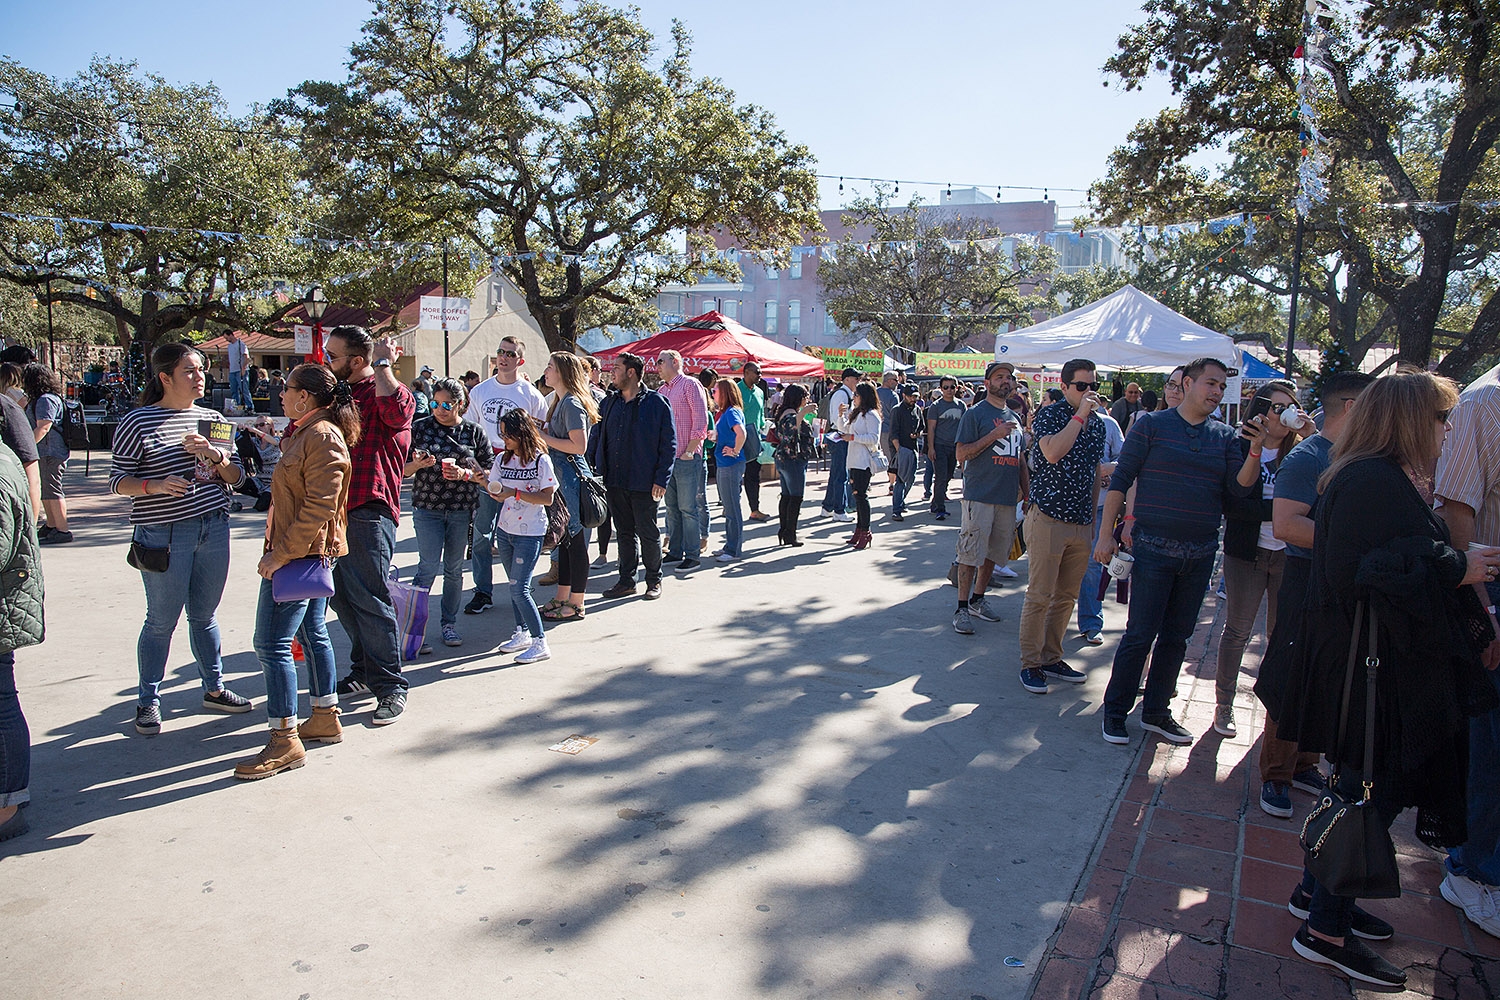 Java lovers descended on La Villita on Saturday for the sold out San Antonio Coffee Festival. <em><b>Photo by B. Kay Richter | Heron contributor</b></em>